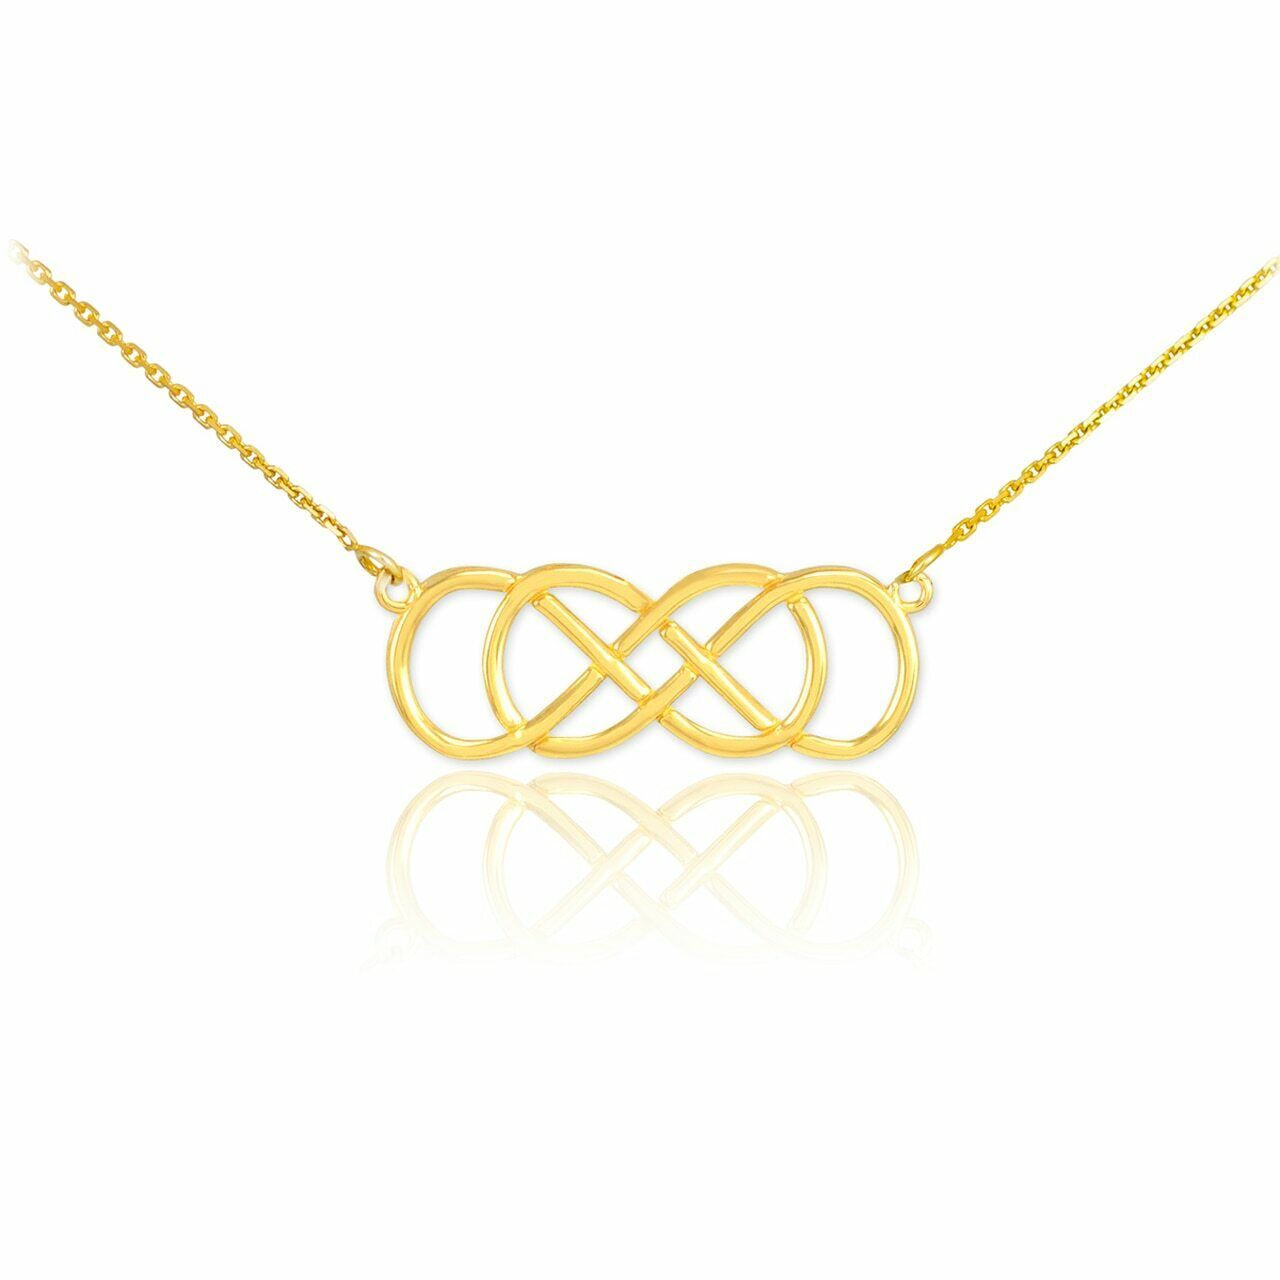 14K Solid Yellow Gold Double Knot Infinity Forever Love Pendant Necklace